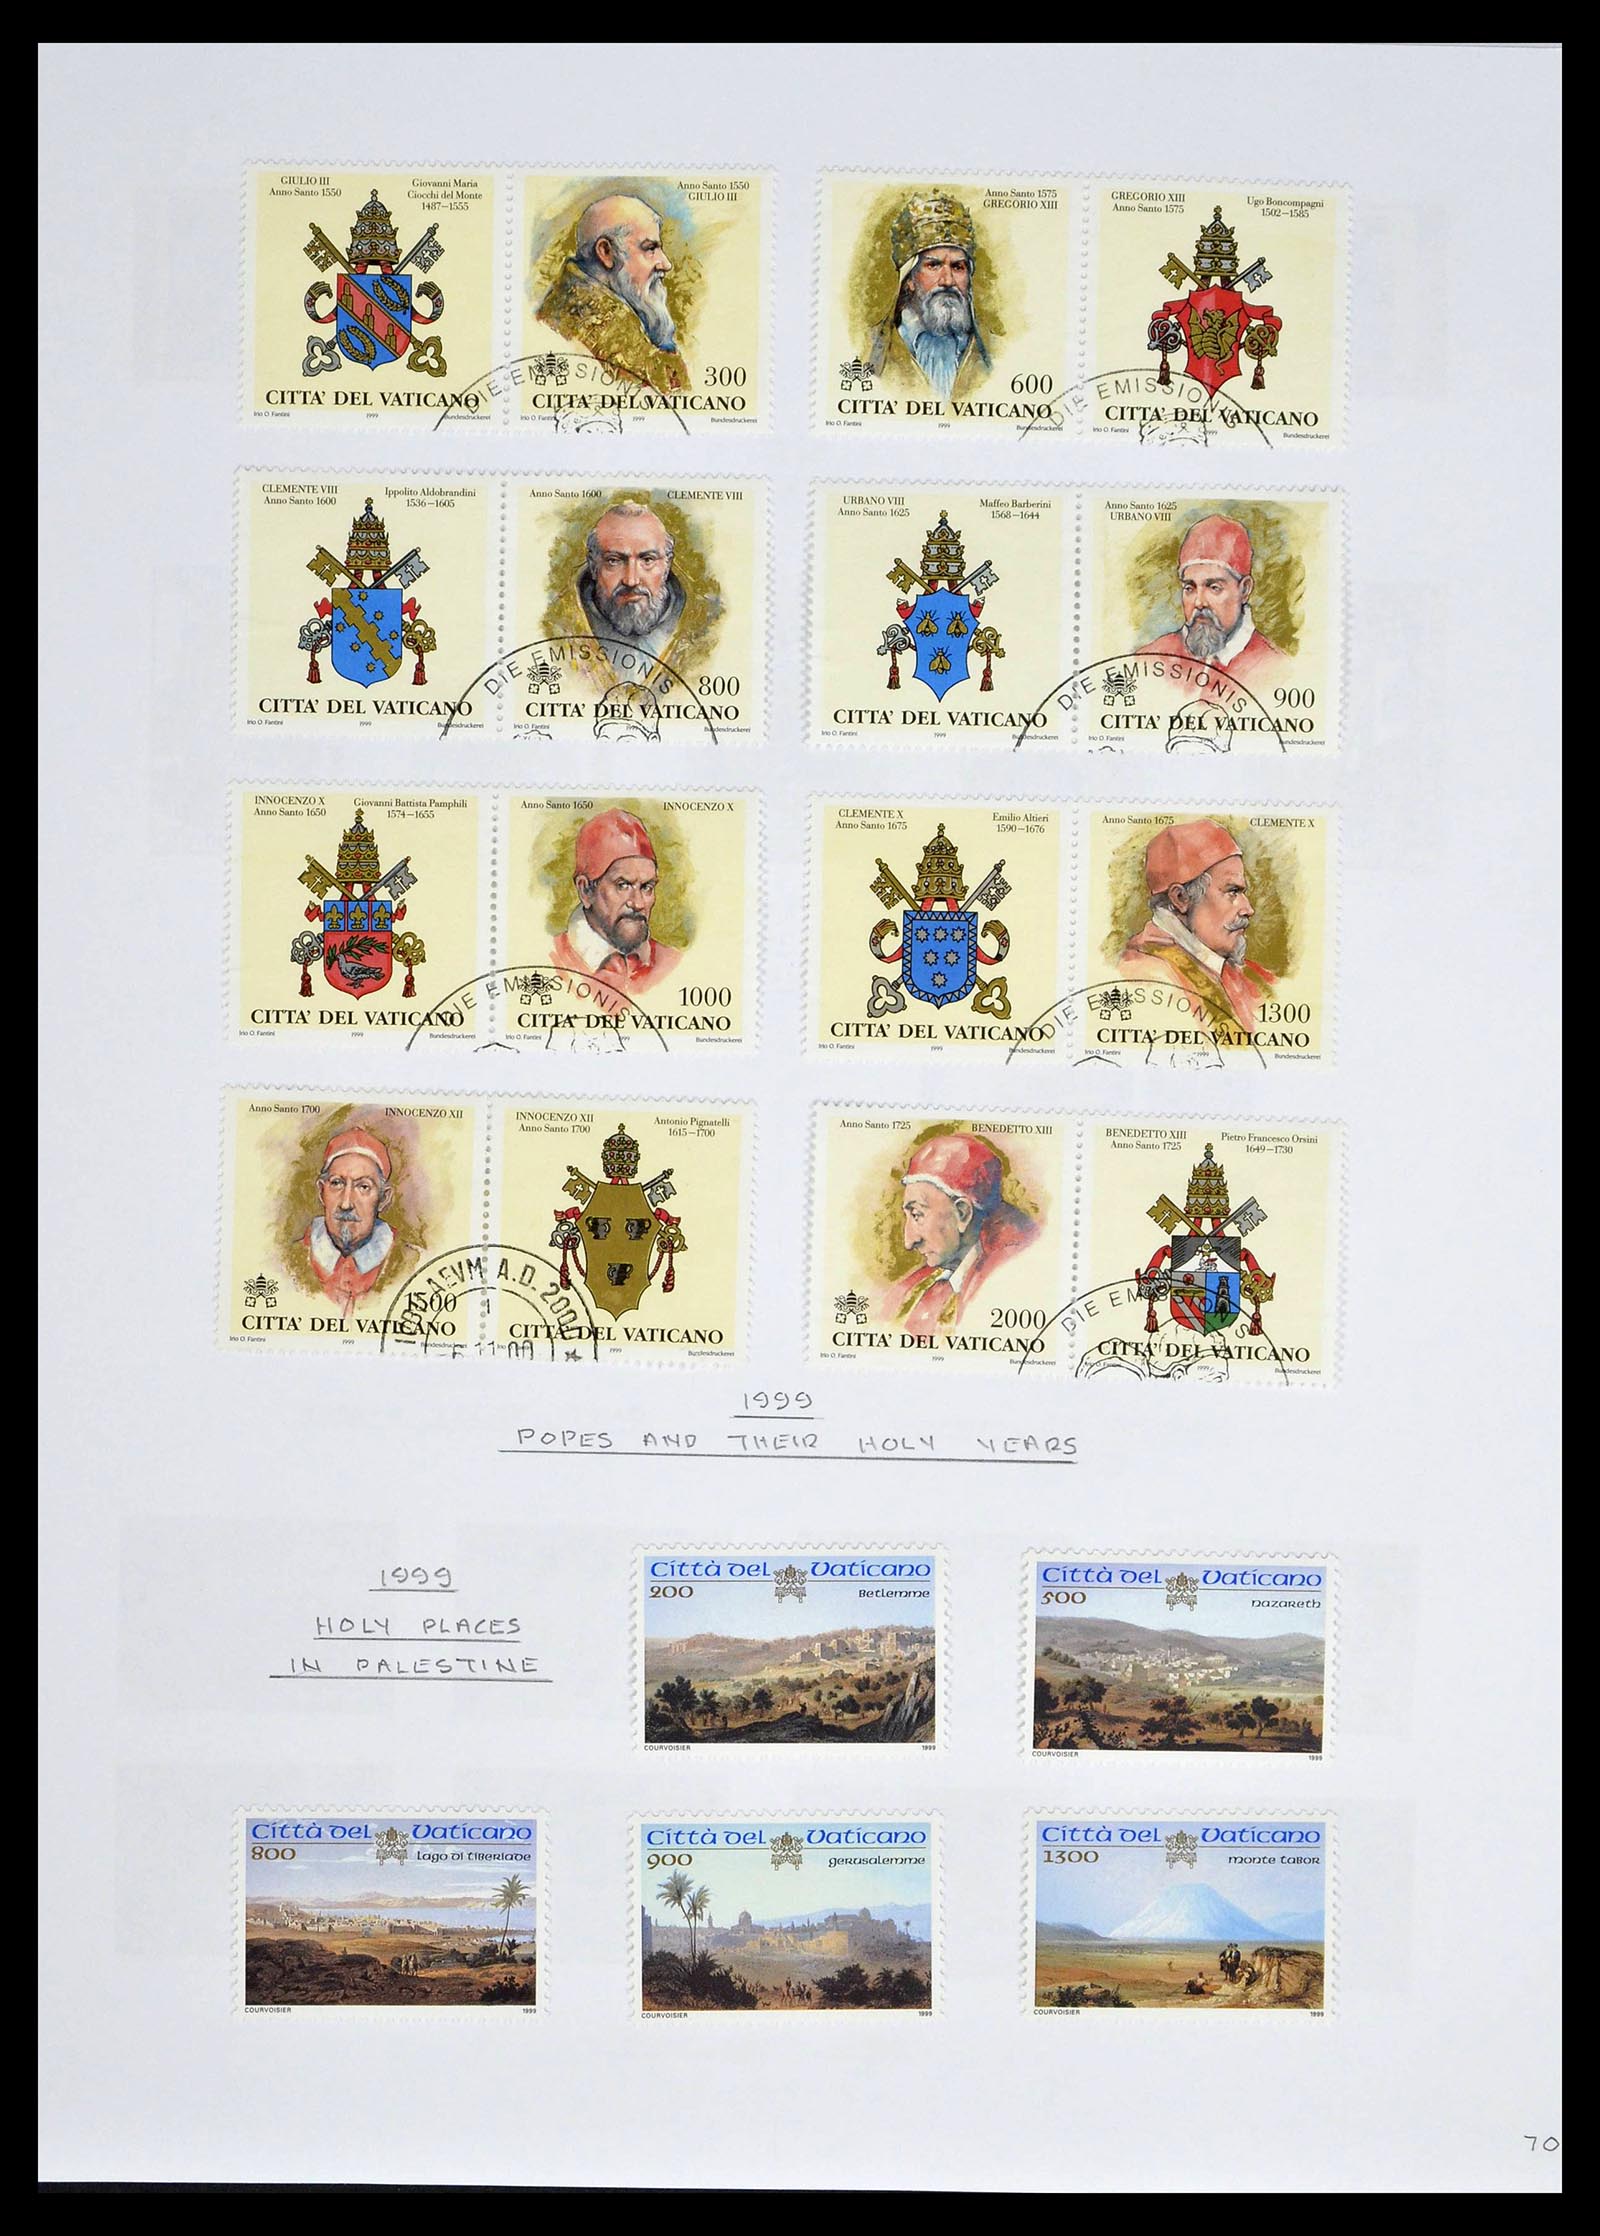 39099 0072 - Stamp collection 39099 Vatican 1852-2008.